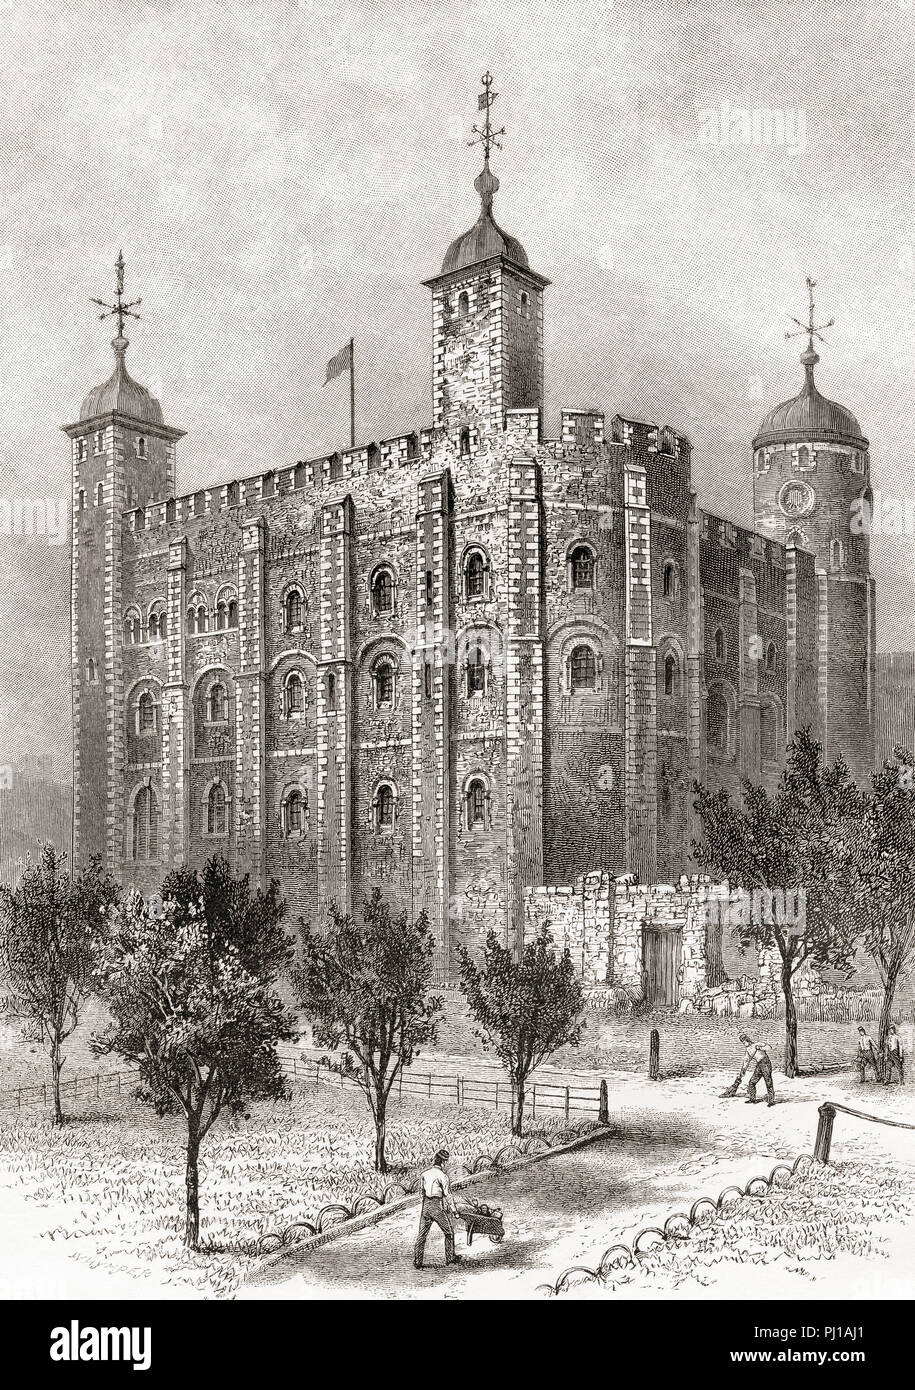 The White Tower seen from the southeast.  The White Tower, a central tower, the old keep, at the Tower of London, England.  From London Pictures, published 1890. Stock Photo